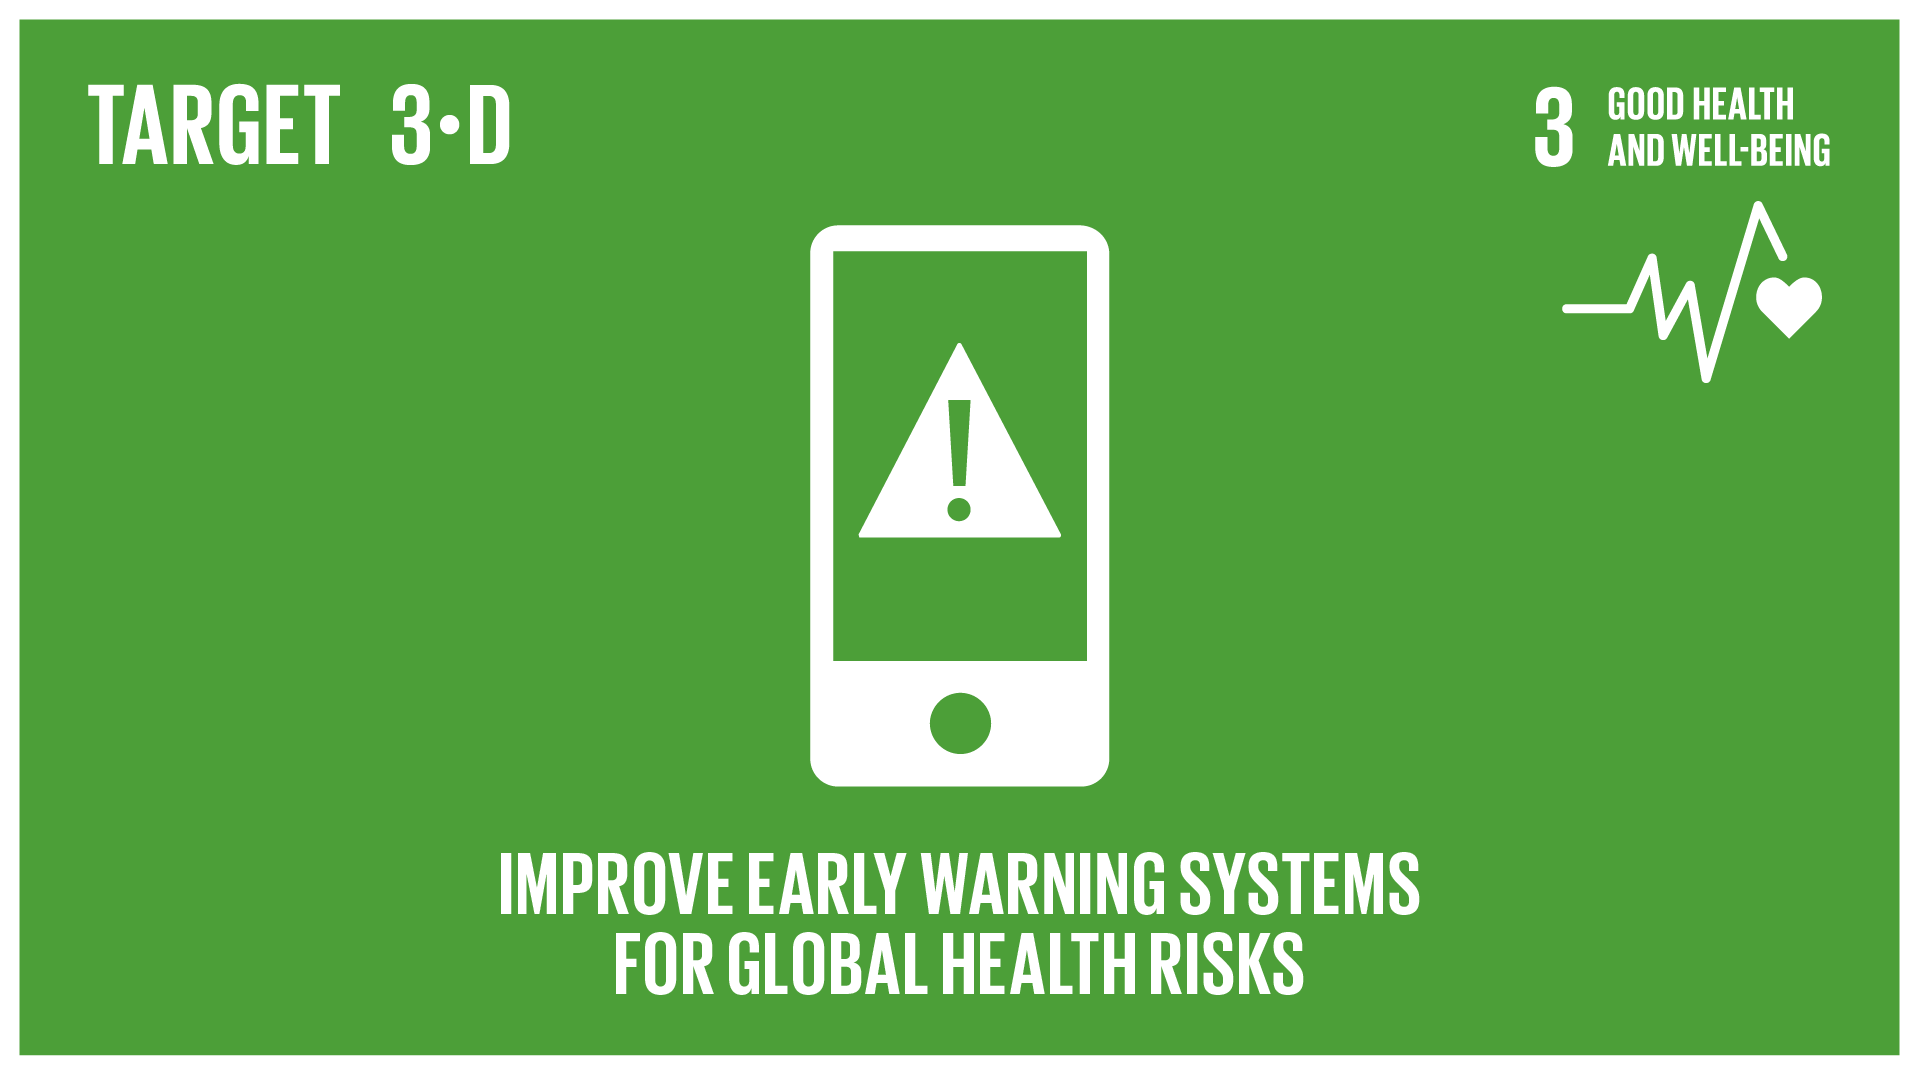 Graphic displaying the improvement of early warning systems for global health risks 